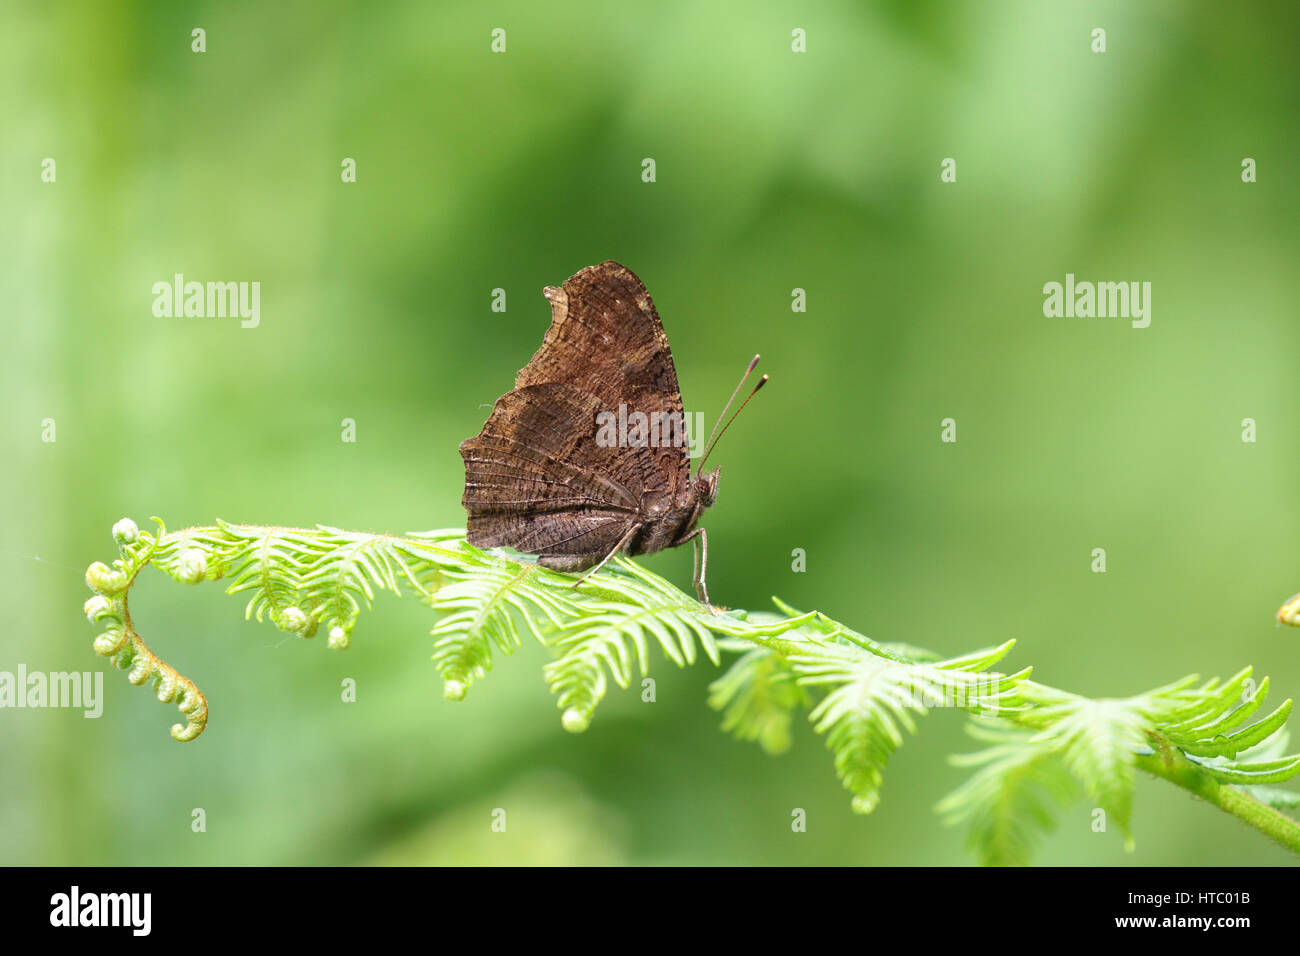 Peacock butterfly resting on a new fern leaf with out of focus green background. Stock Photo